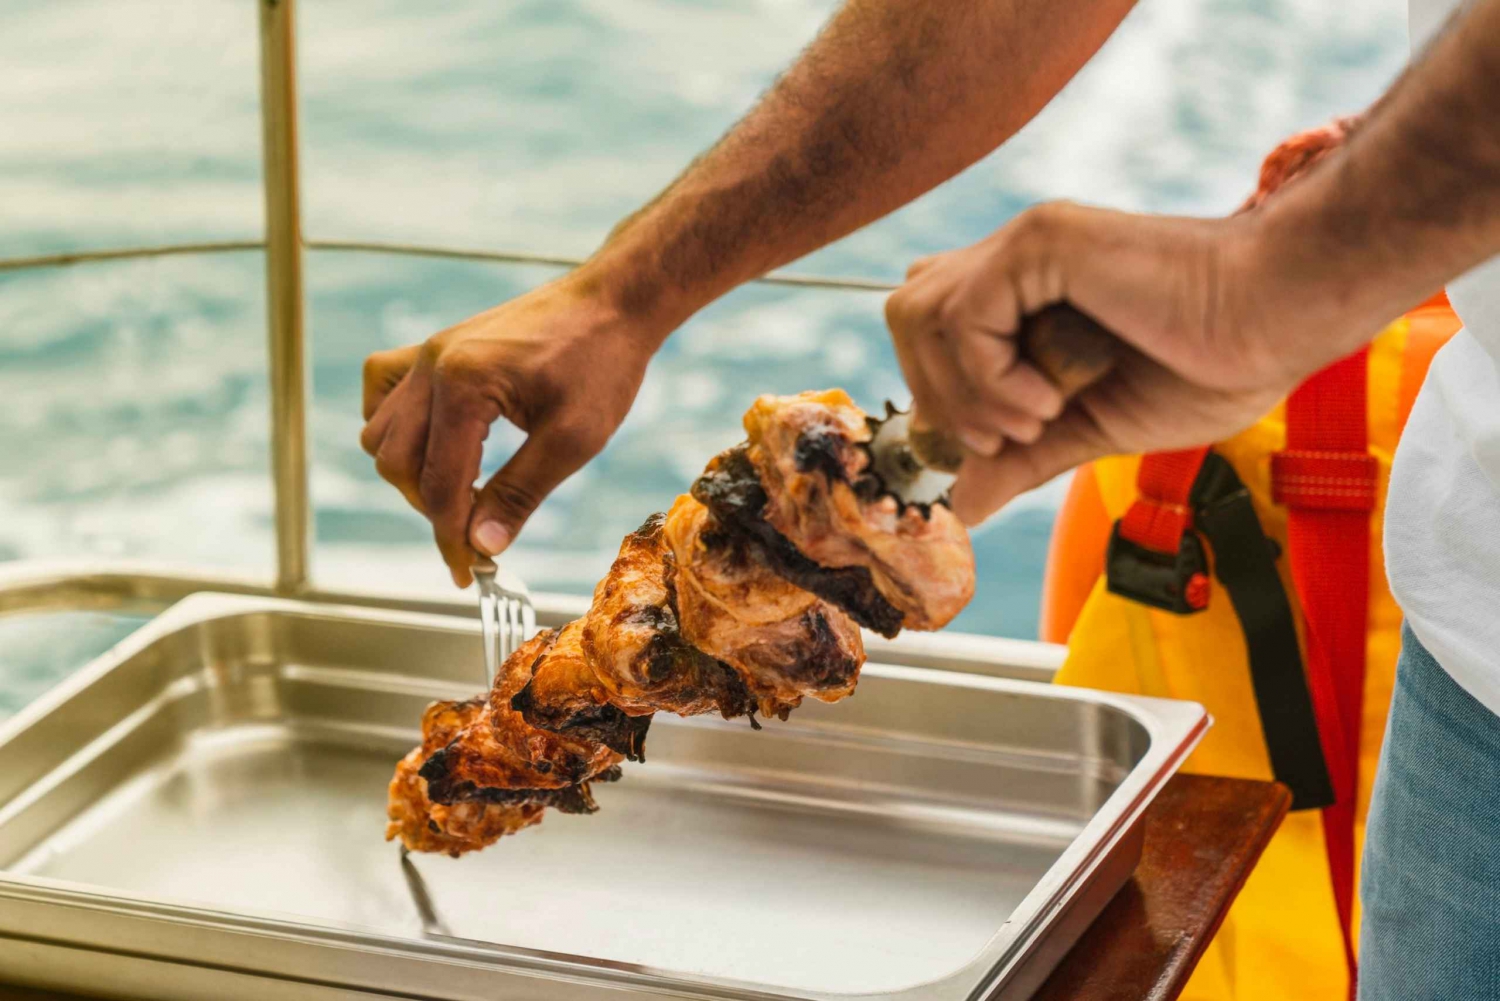 Protaras: Family Sunset Cruise with freshly cooked BBQ meal